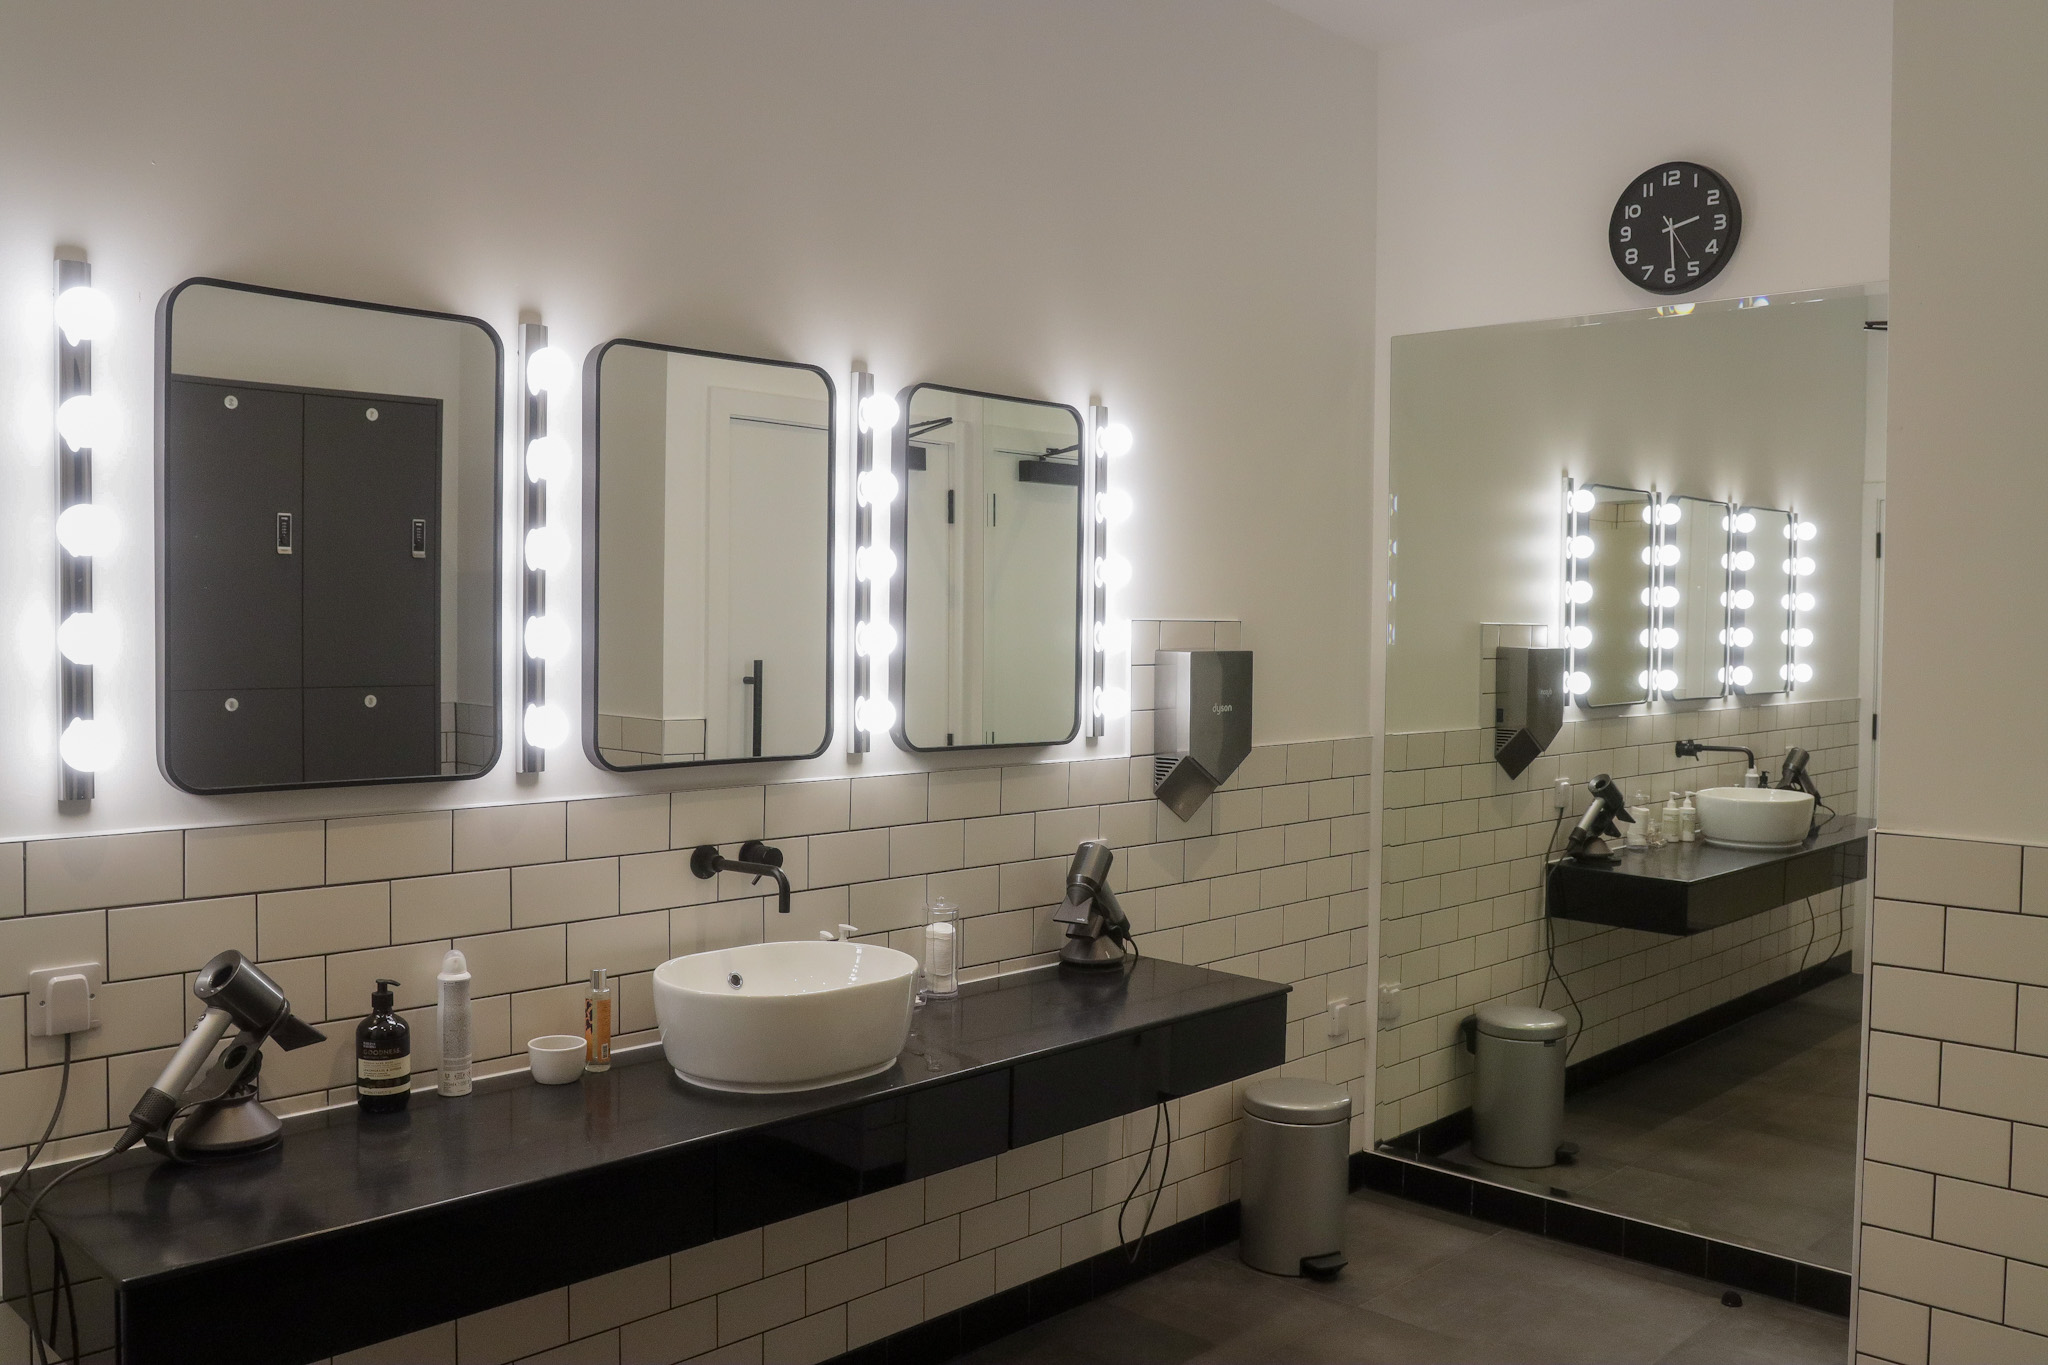 A line of mirrors with lights around them in a changing room with a large mirror on the wall to the right.